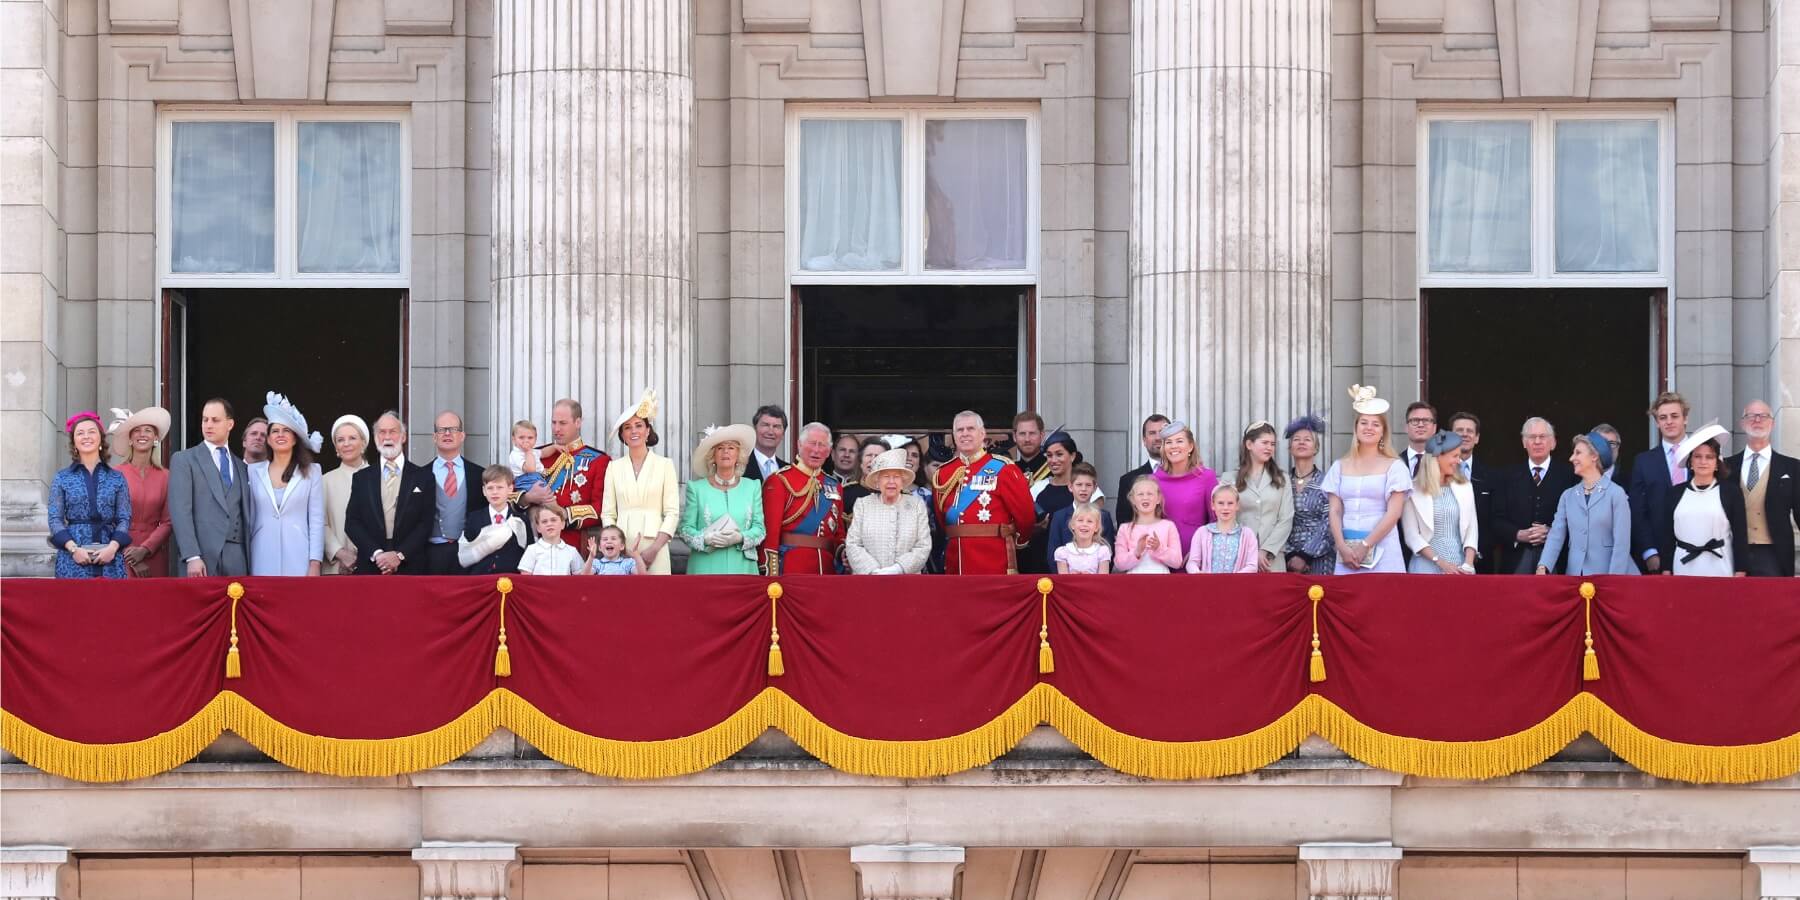 The British royal family in 2019 on the Buckingham Palace balcony.